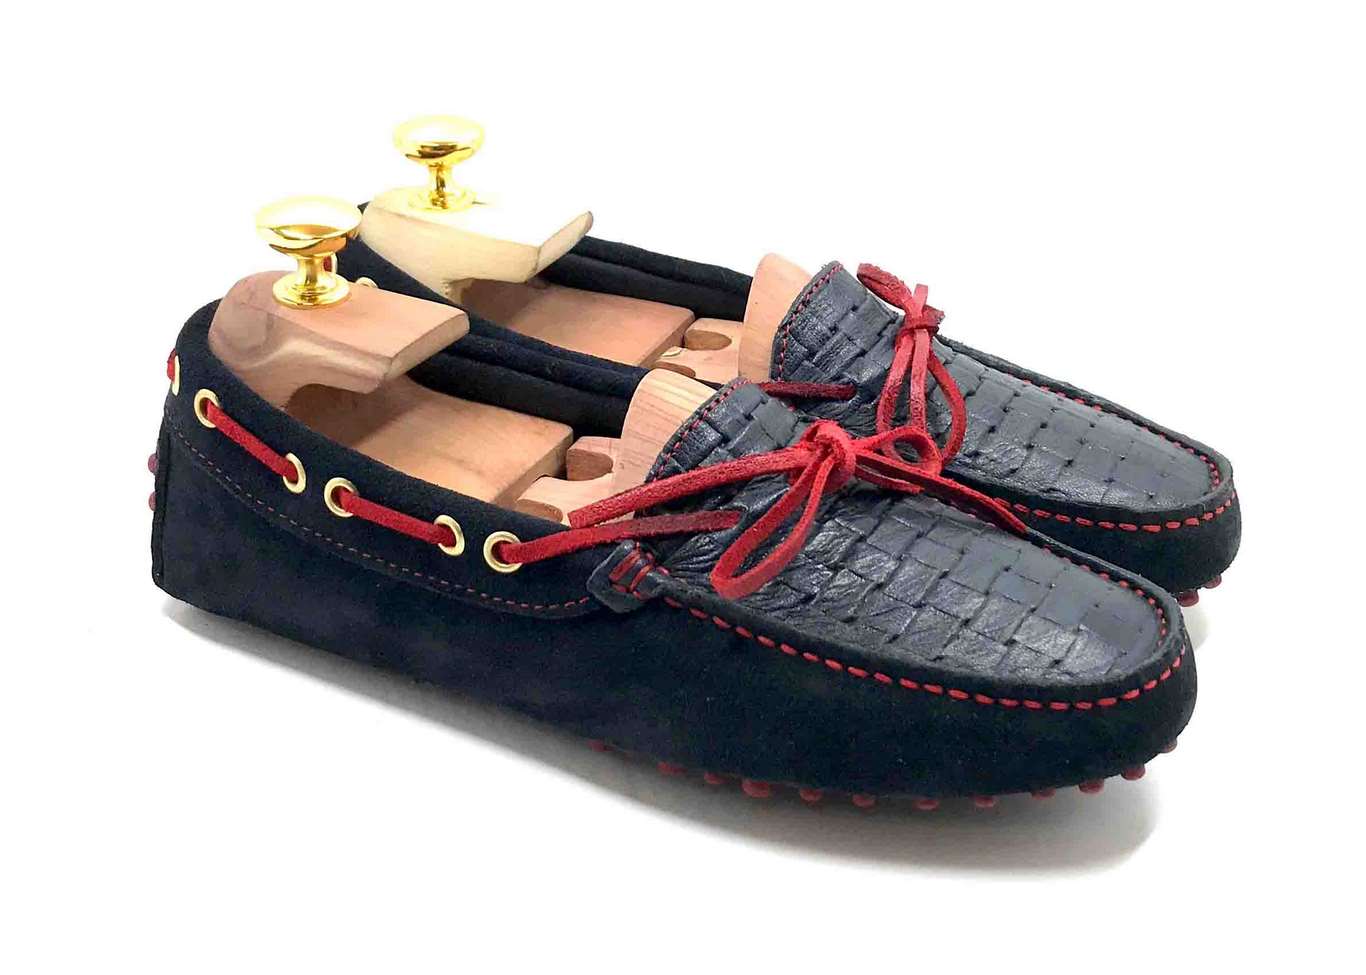 Loafers 'Drive' in Blue navy suede & woven calf, with laces and stitching in Red.